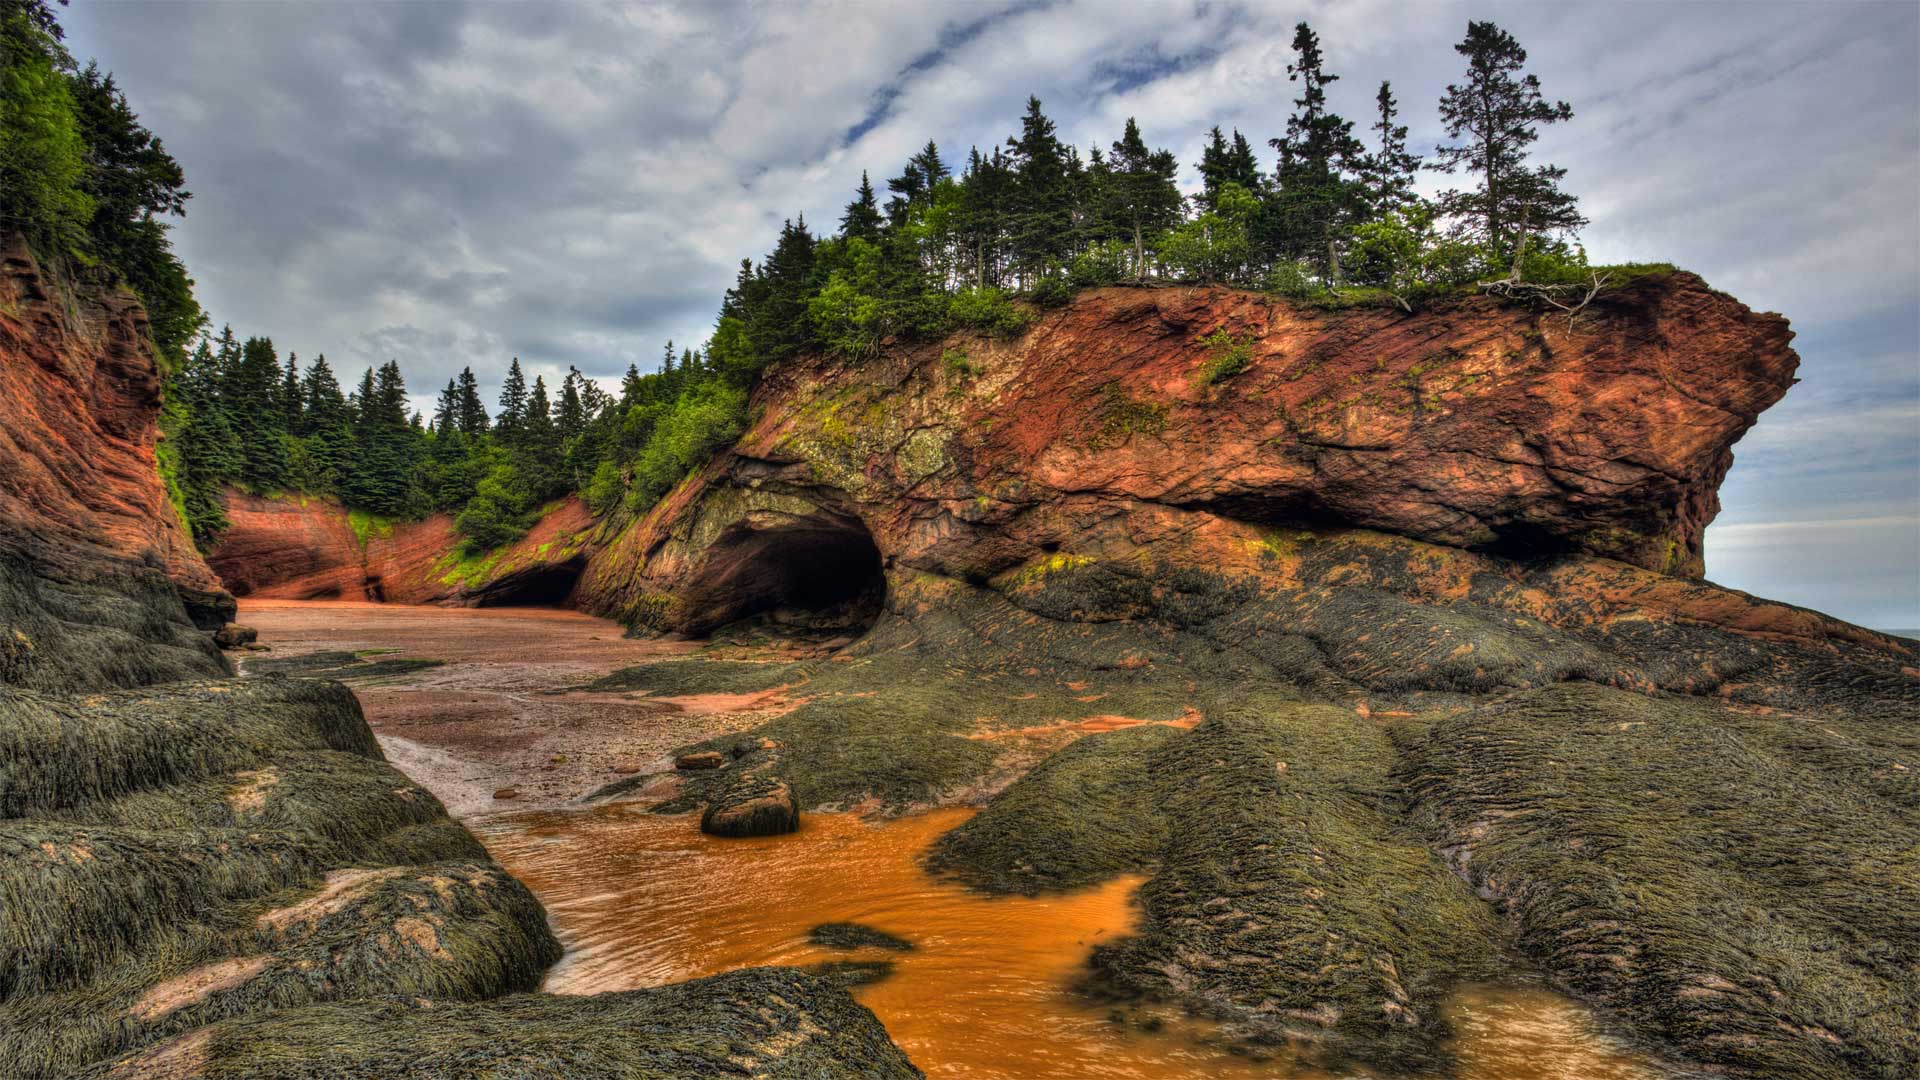 Caves and coastal features at low tide on the Bay of Fundy, near St. Martins, New Brunswick, Canada - Jamie Roach/Shutterstock)